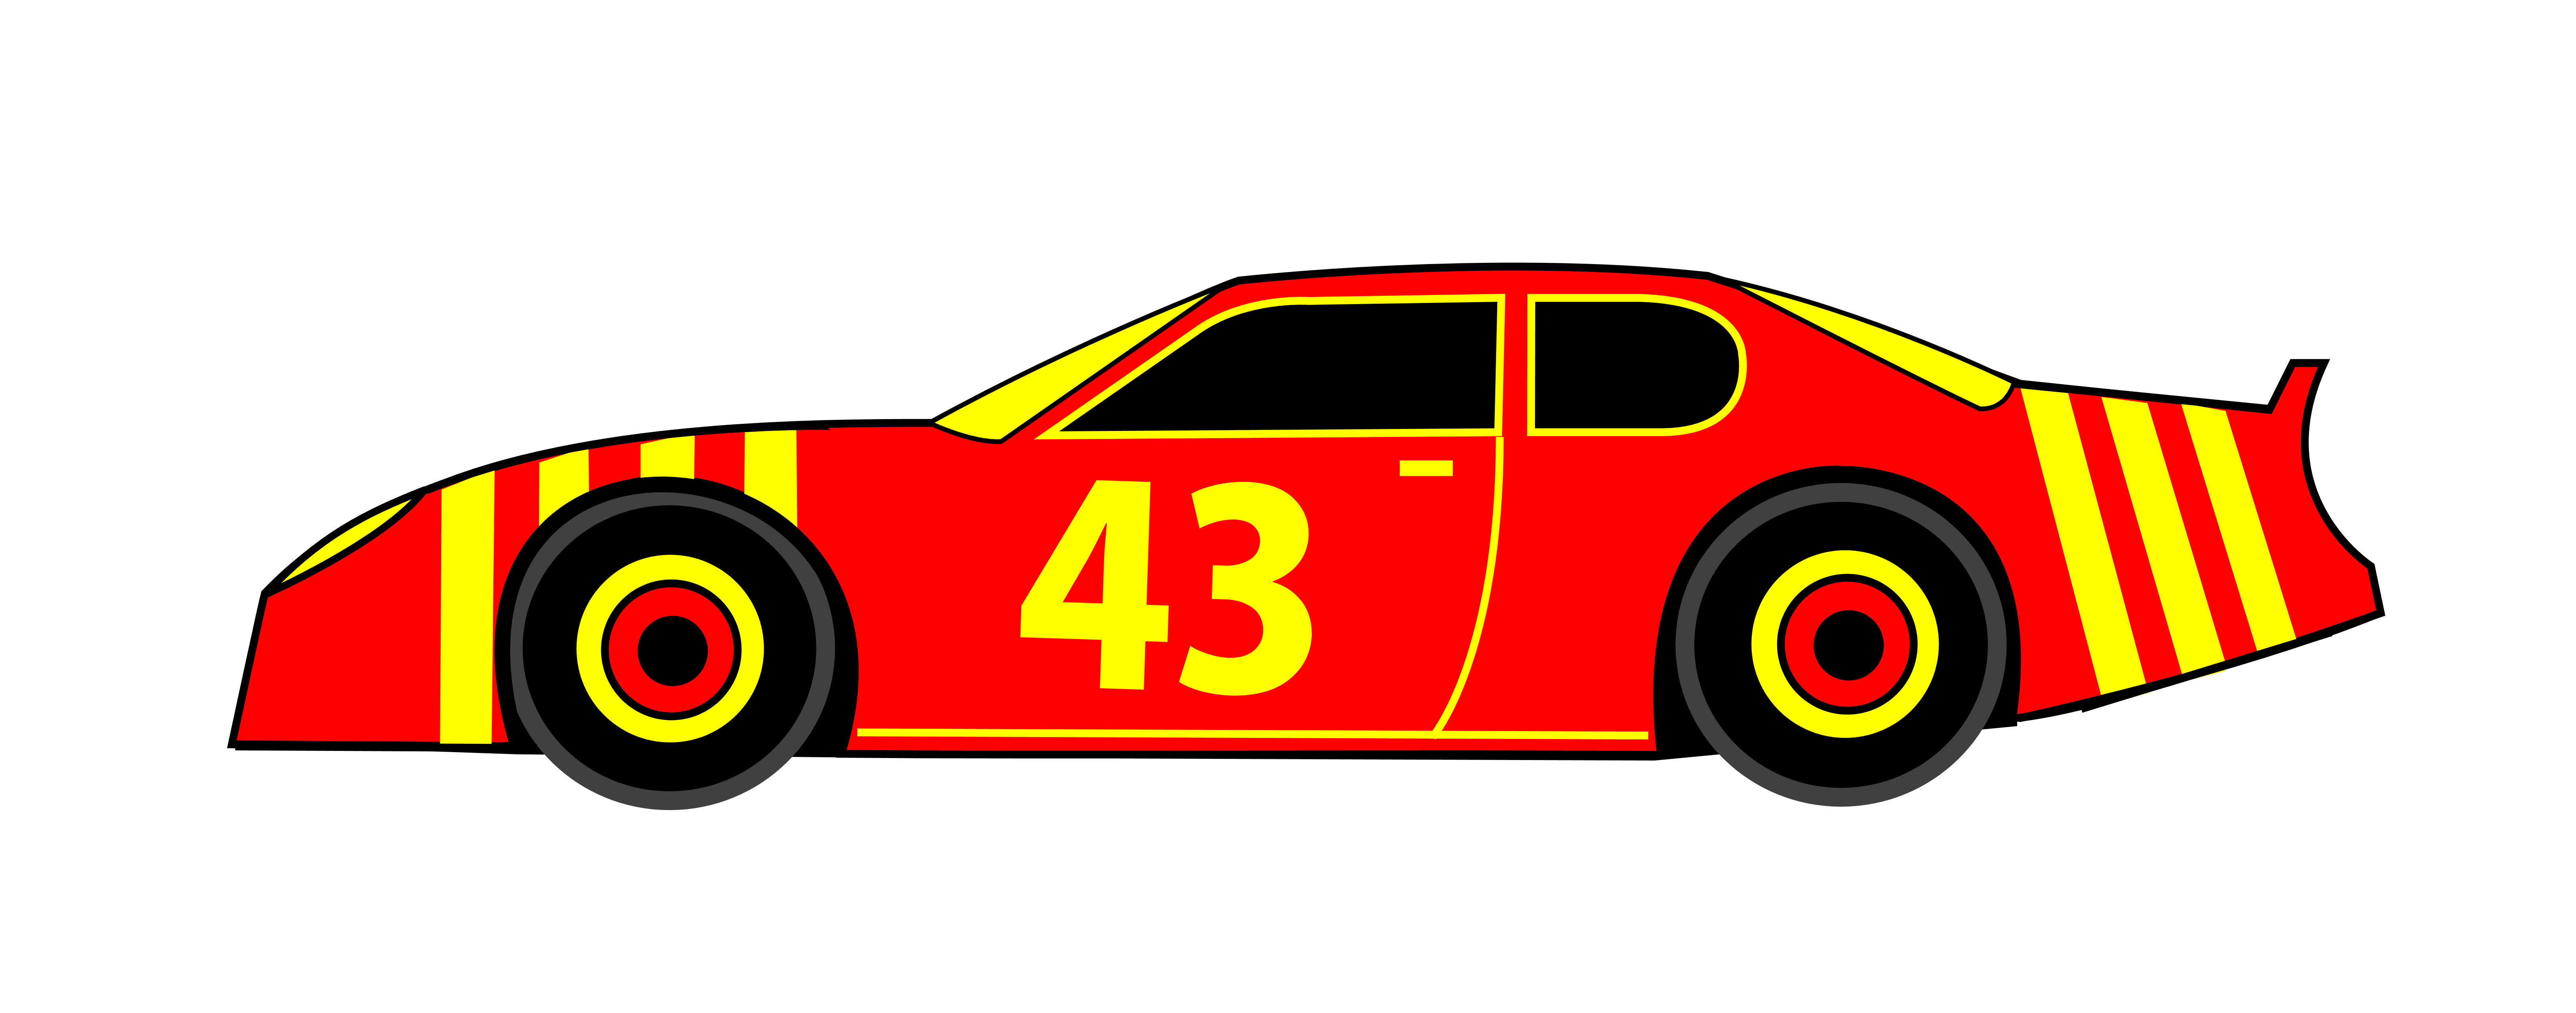 NASCAR Clipart | Free Download .